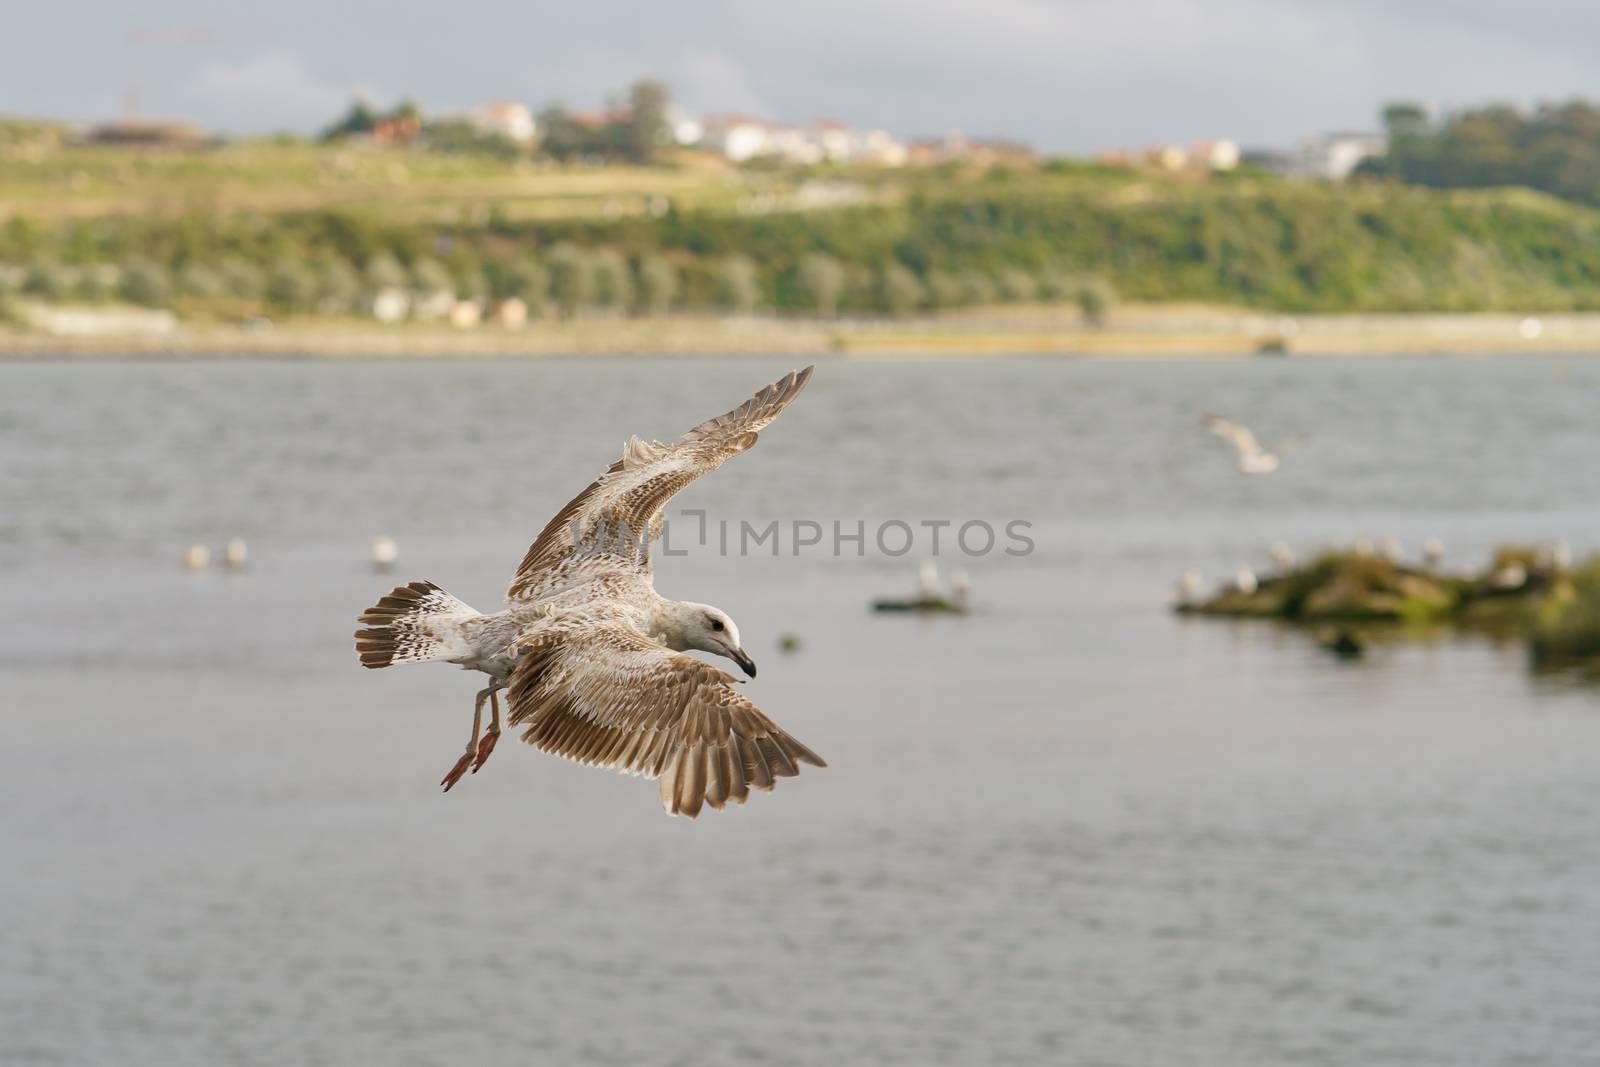 A seagull hovering over the river